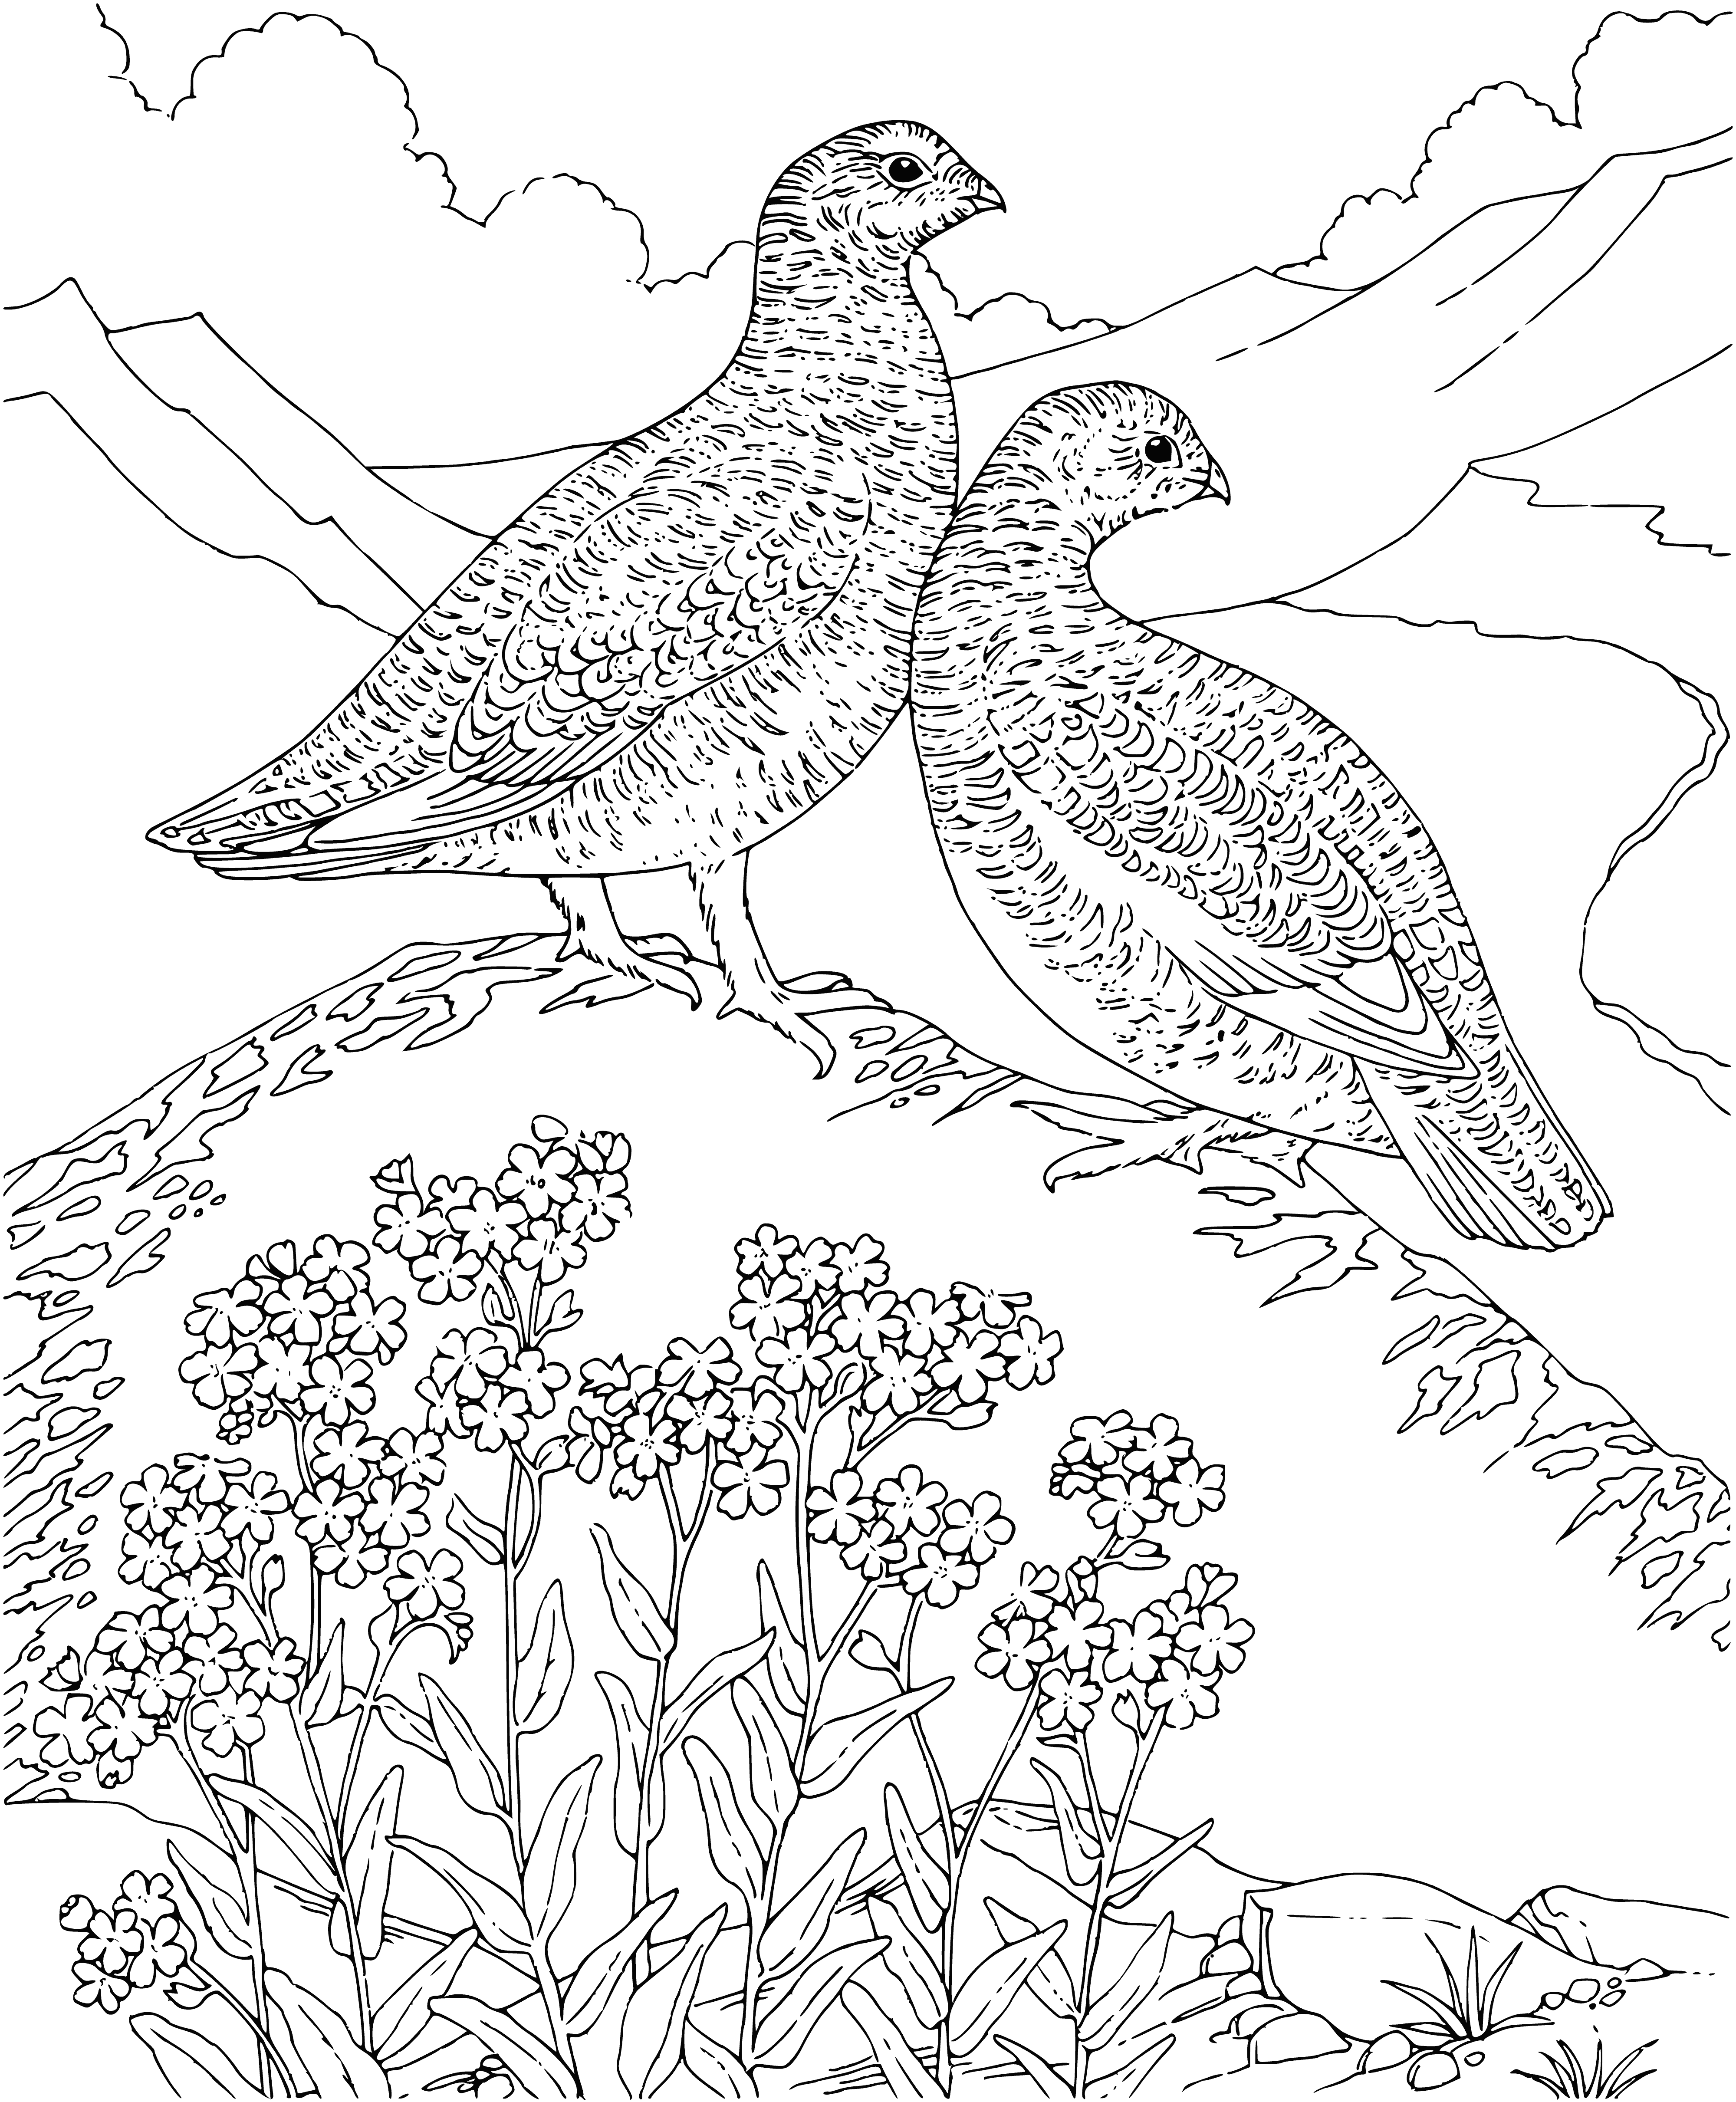 coloring page: Group of chickens on farm pecking for food; feathers in many colors. #chickens